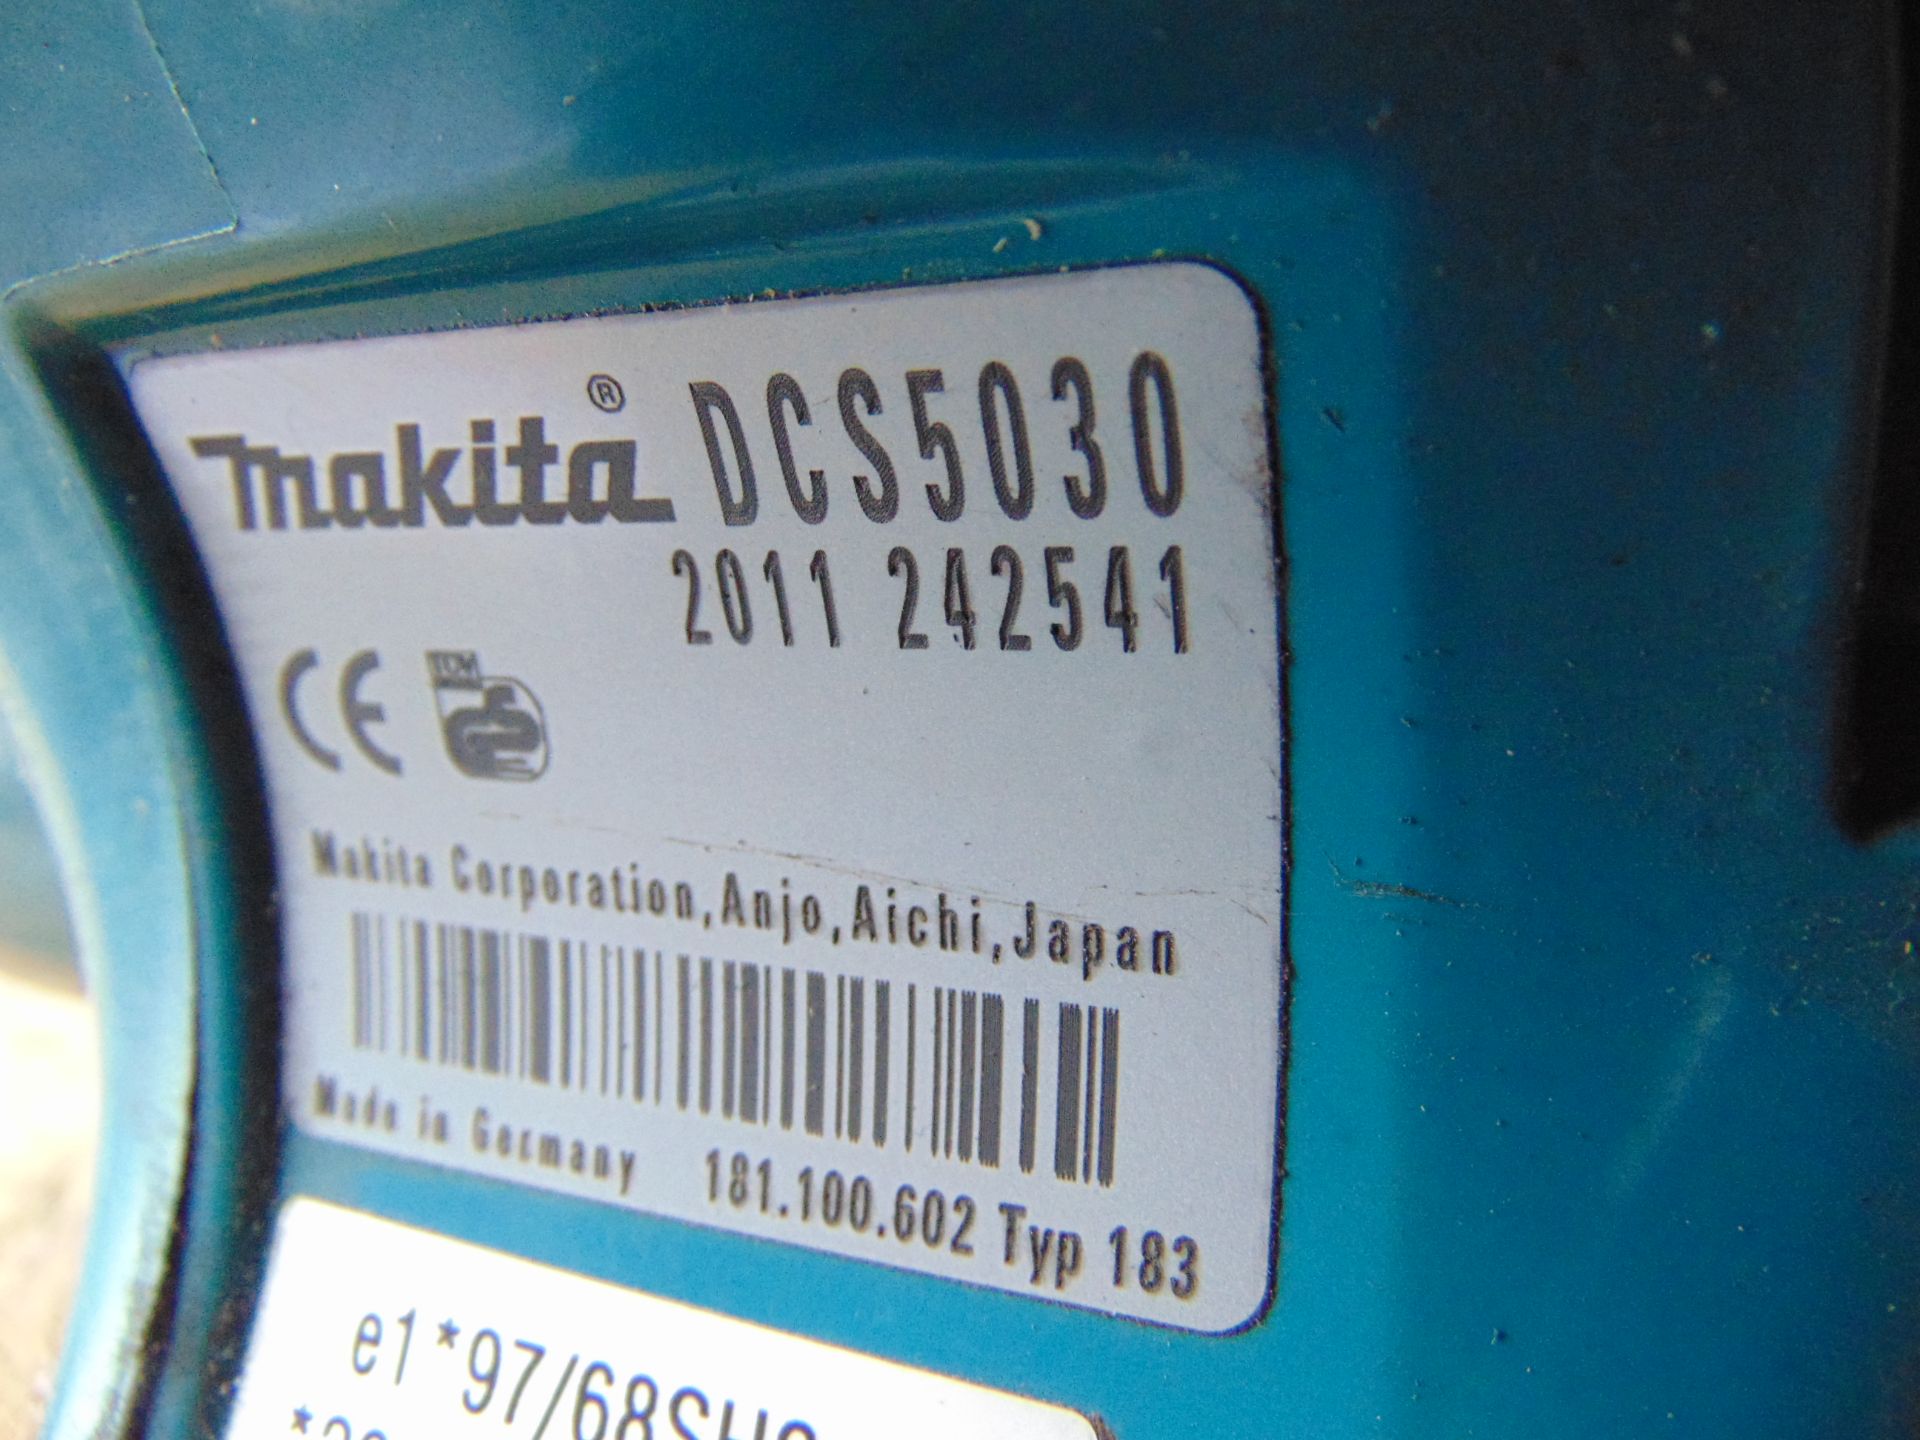 MAKITA DCS 5030 50CC Chainsaw c/w Chain Guard from MoD. - Image 5 of 5